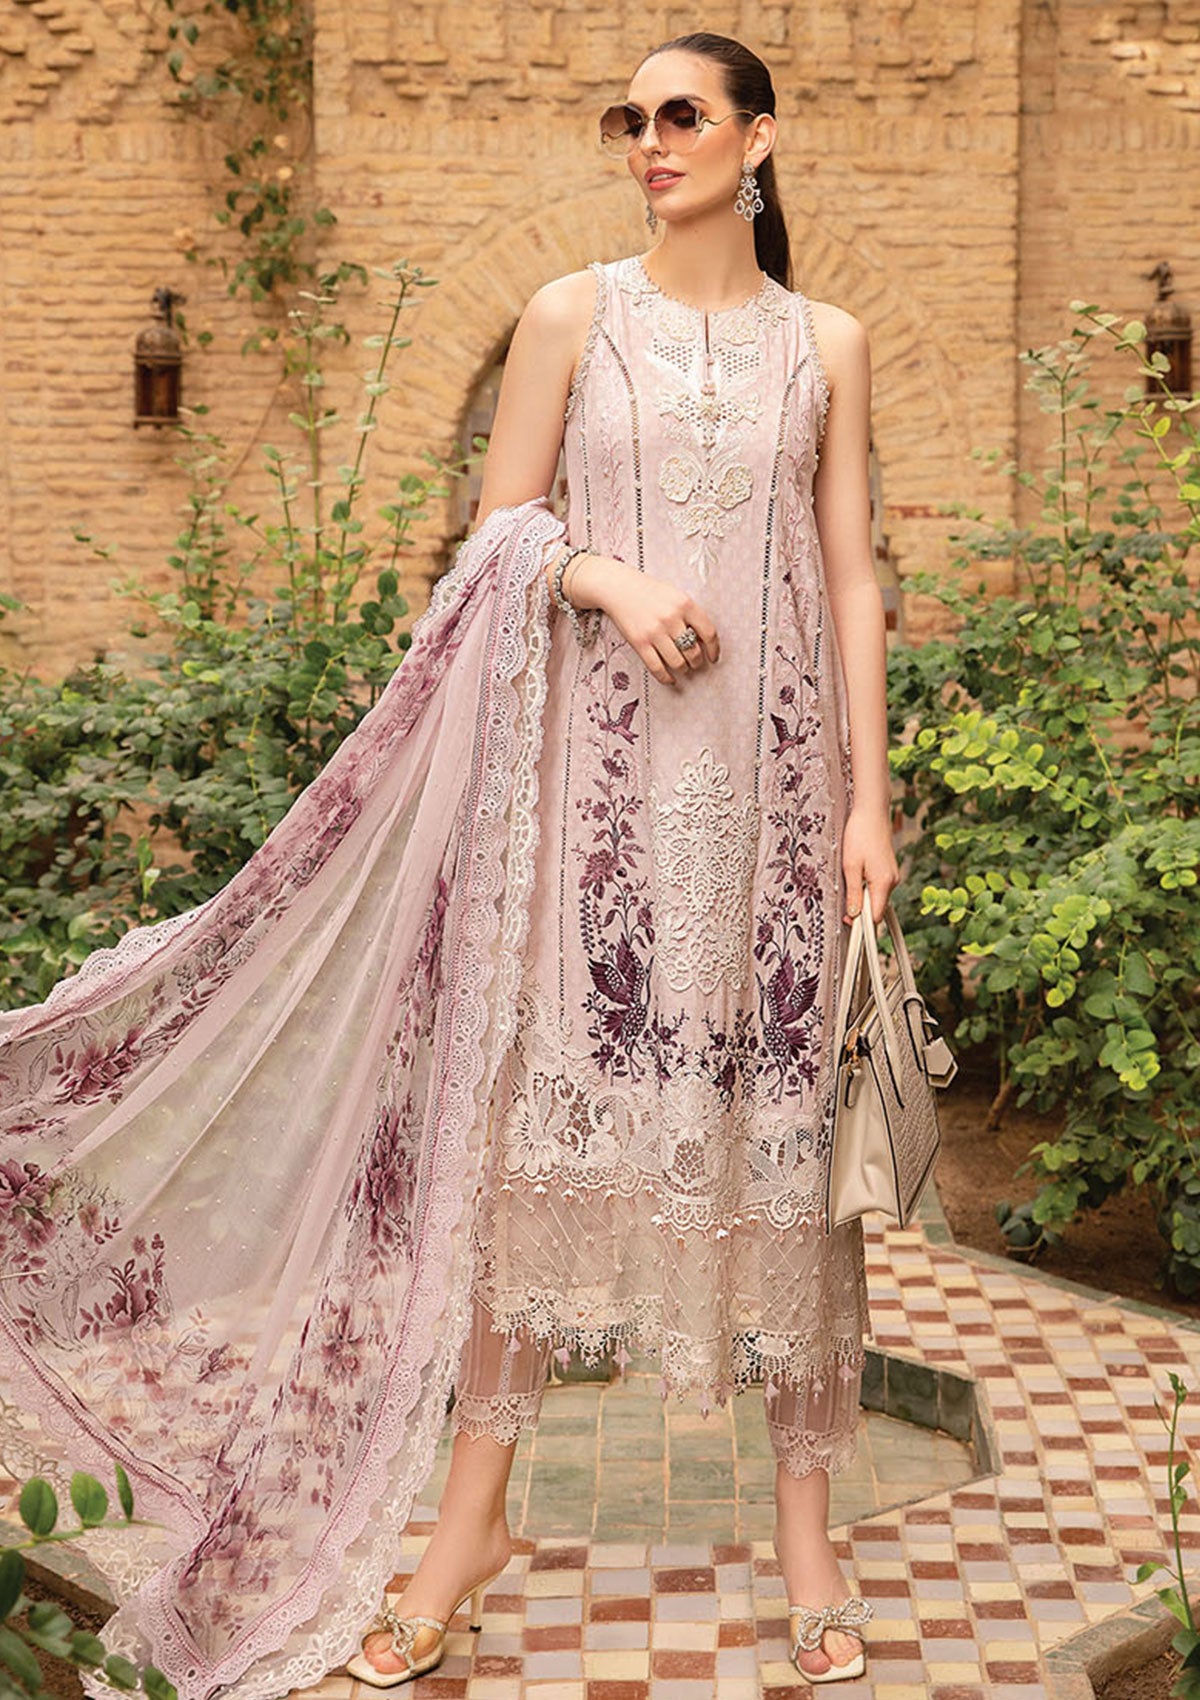 Lawn Collection - Maria B - Voyage a'Luxe - Luxury - MB24#14A